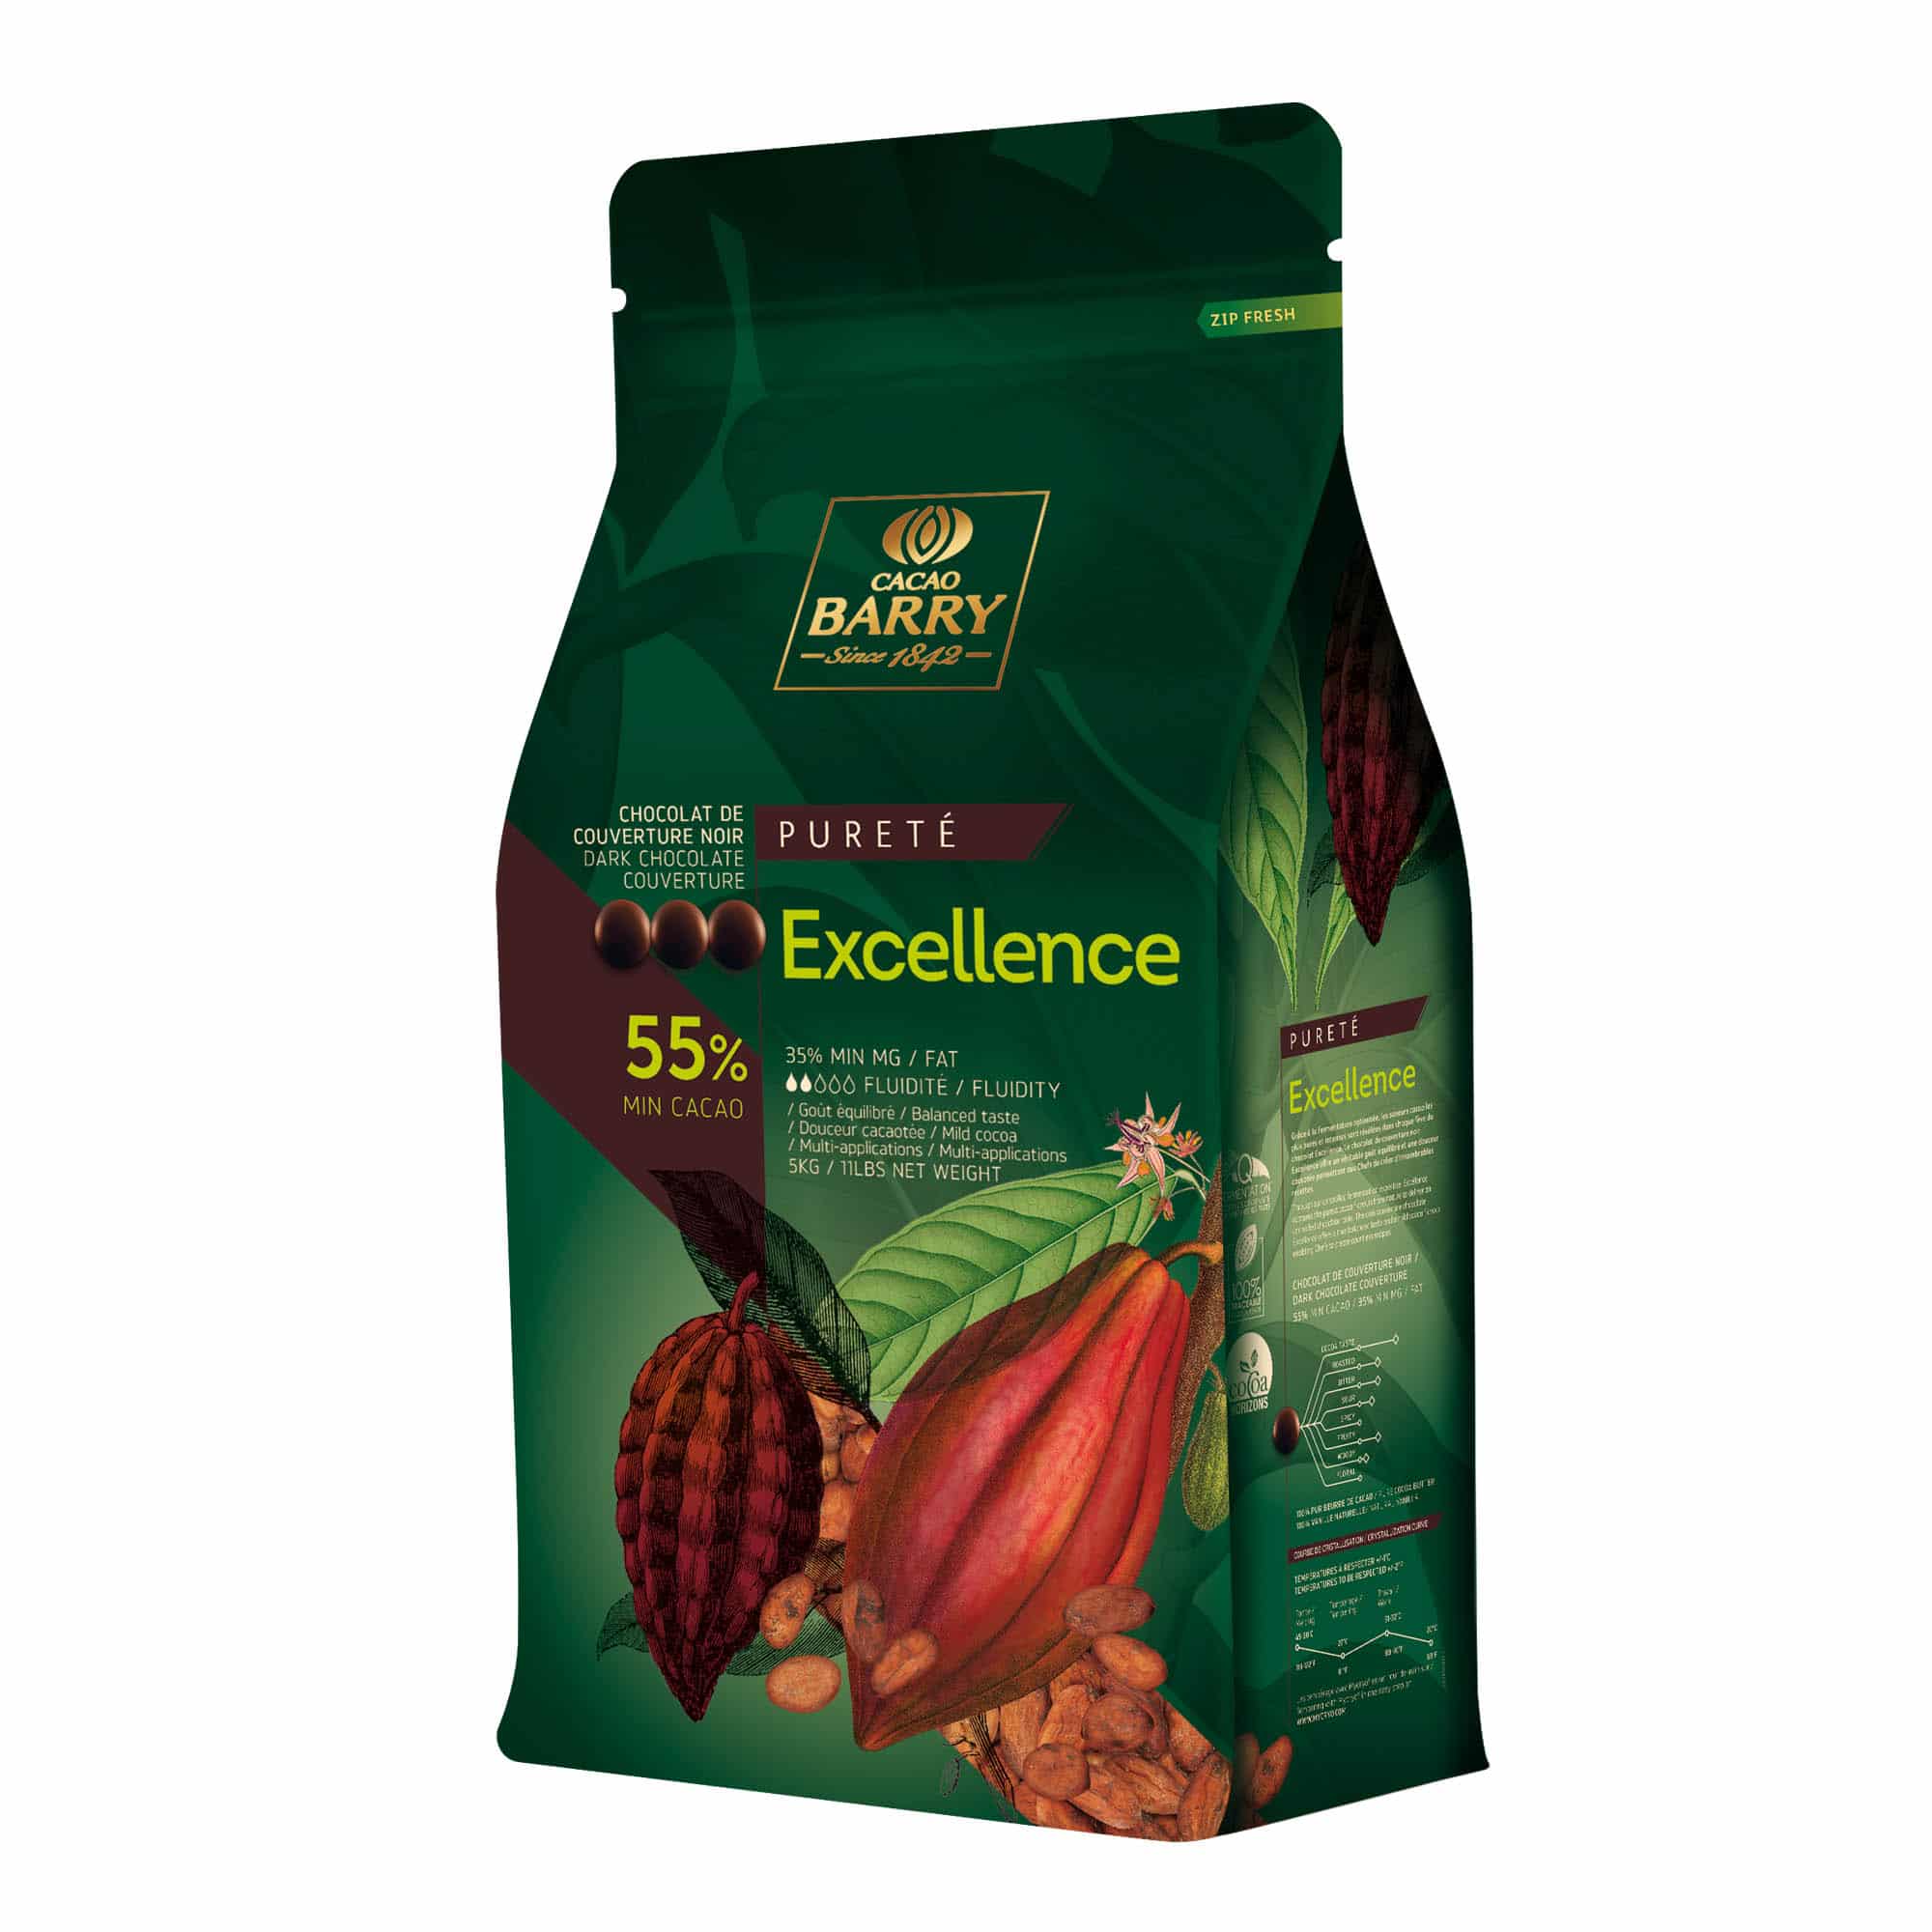 Cacao Barry Excellence 55% Dark Chocolate Pistoles | Food Related